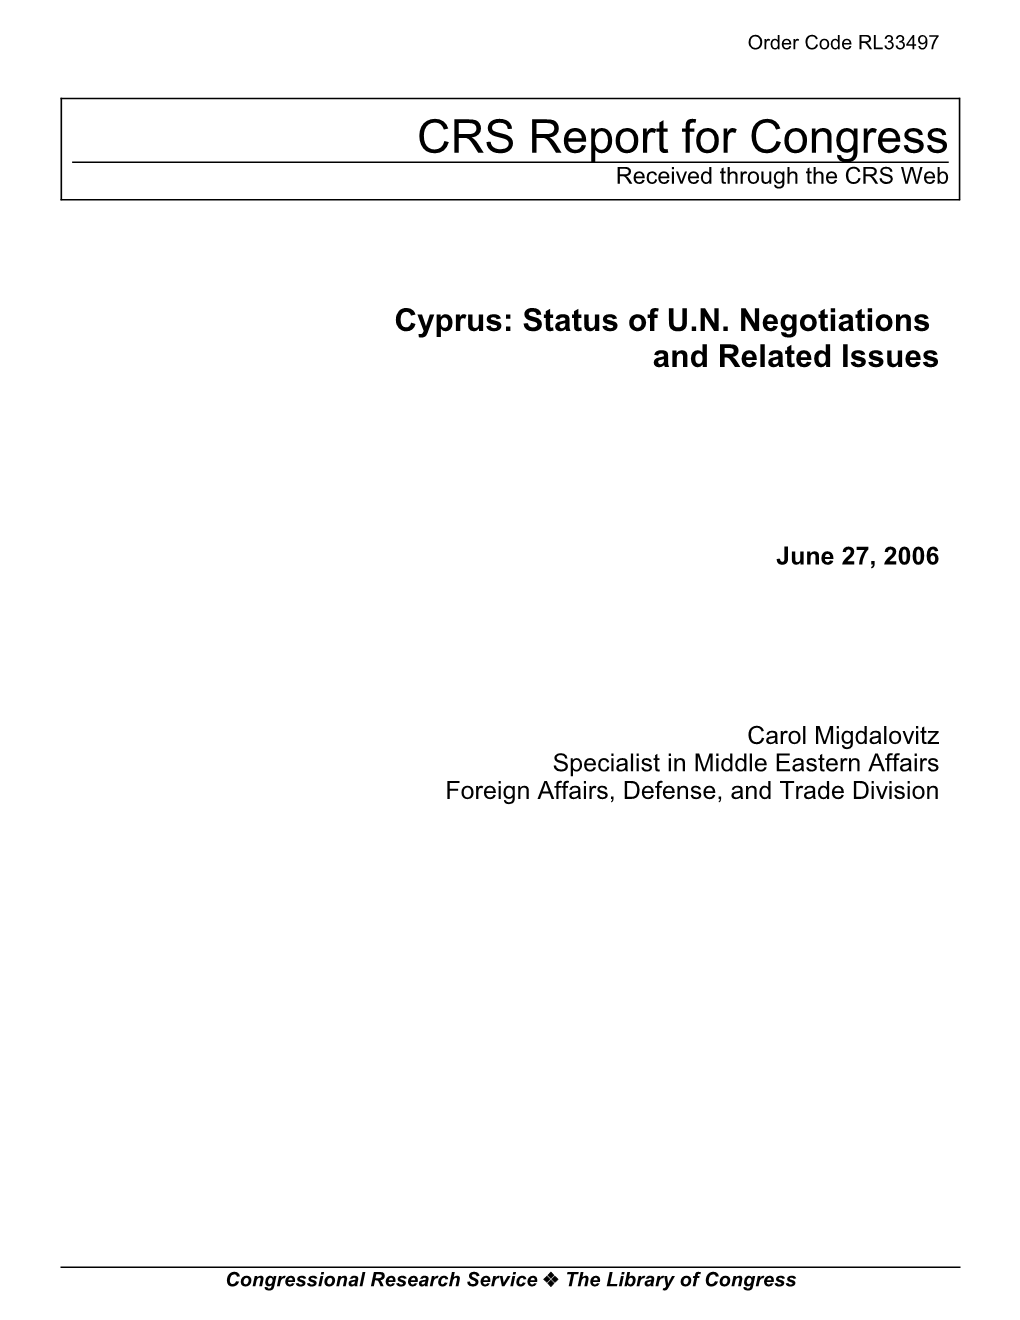 Cyprus: Status of U.N. Negotiations and Related Issues